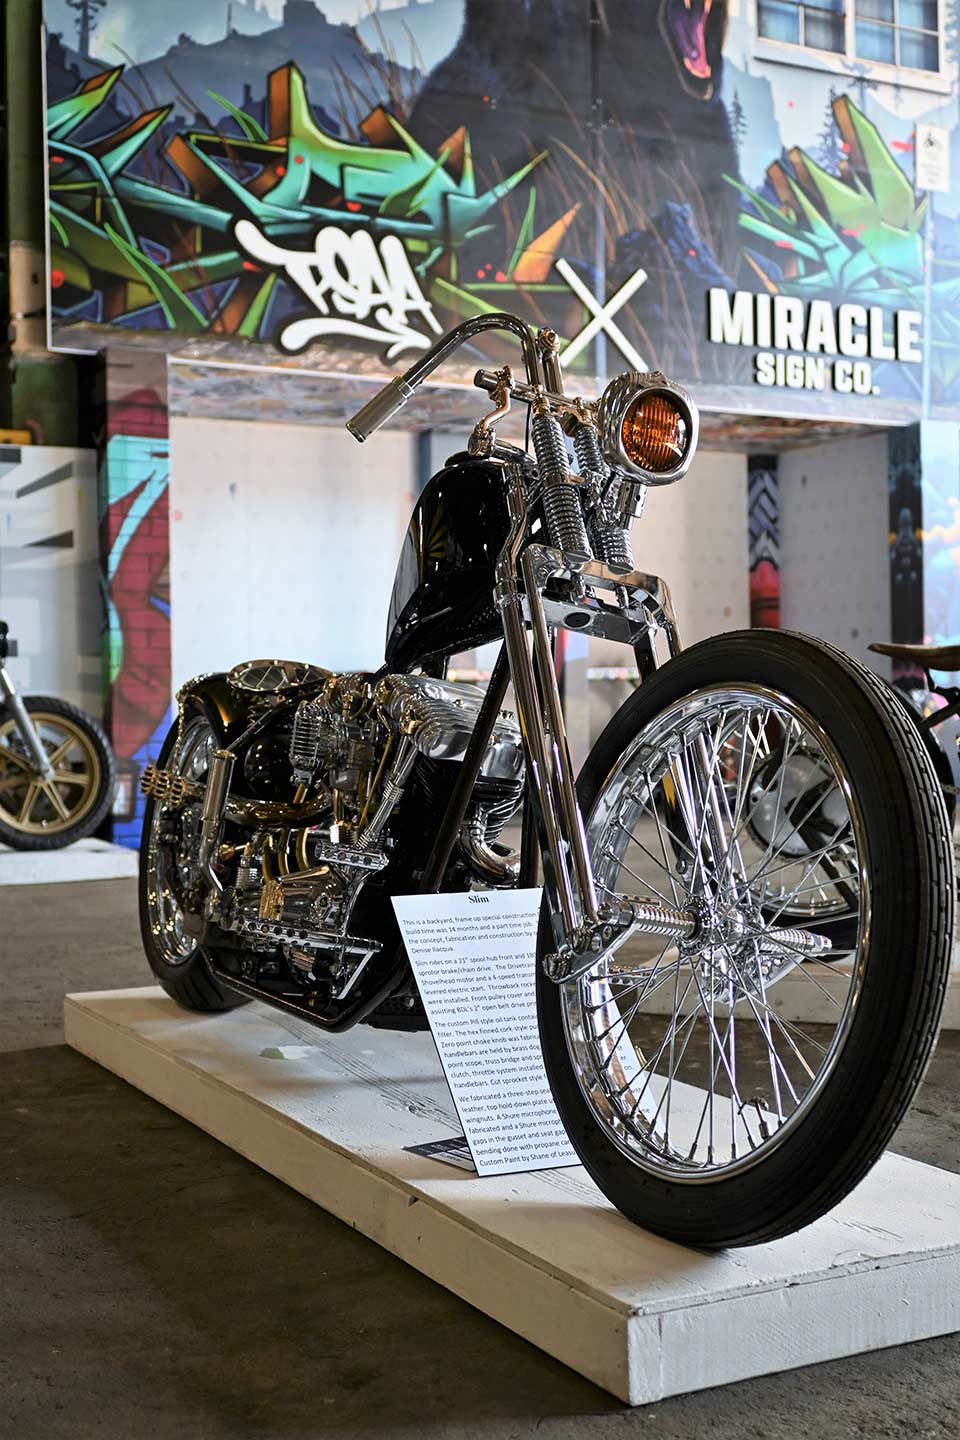 Dubbed “Slim,” this frame-up, special construction chopper features a 1976 Shovelhead engine, custom Pill-style oil tank, and a Shure microphone as an intake! Owners Gino and Denise Ilacqua did much of the concept, fabrication, and assembly.